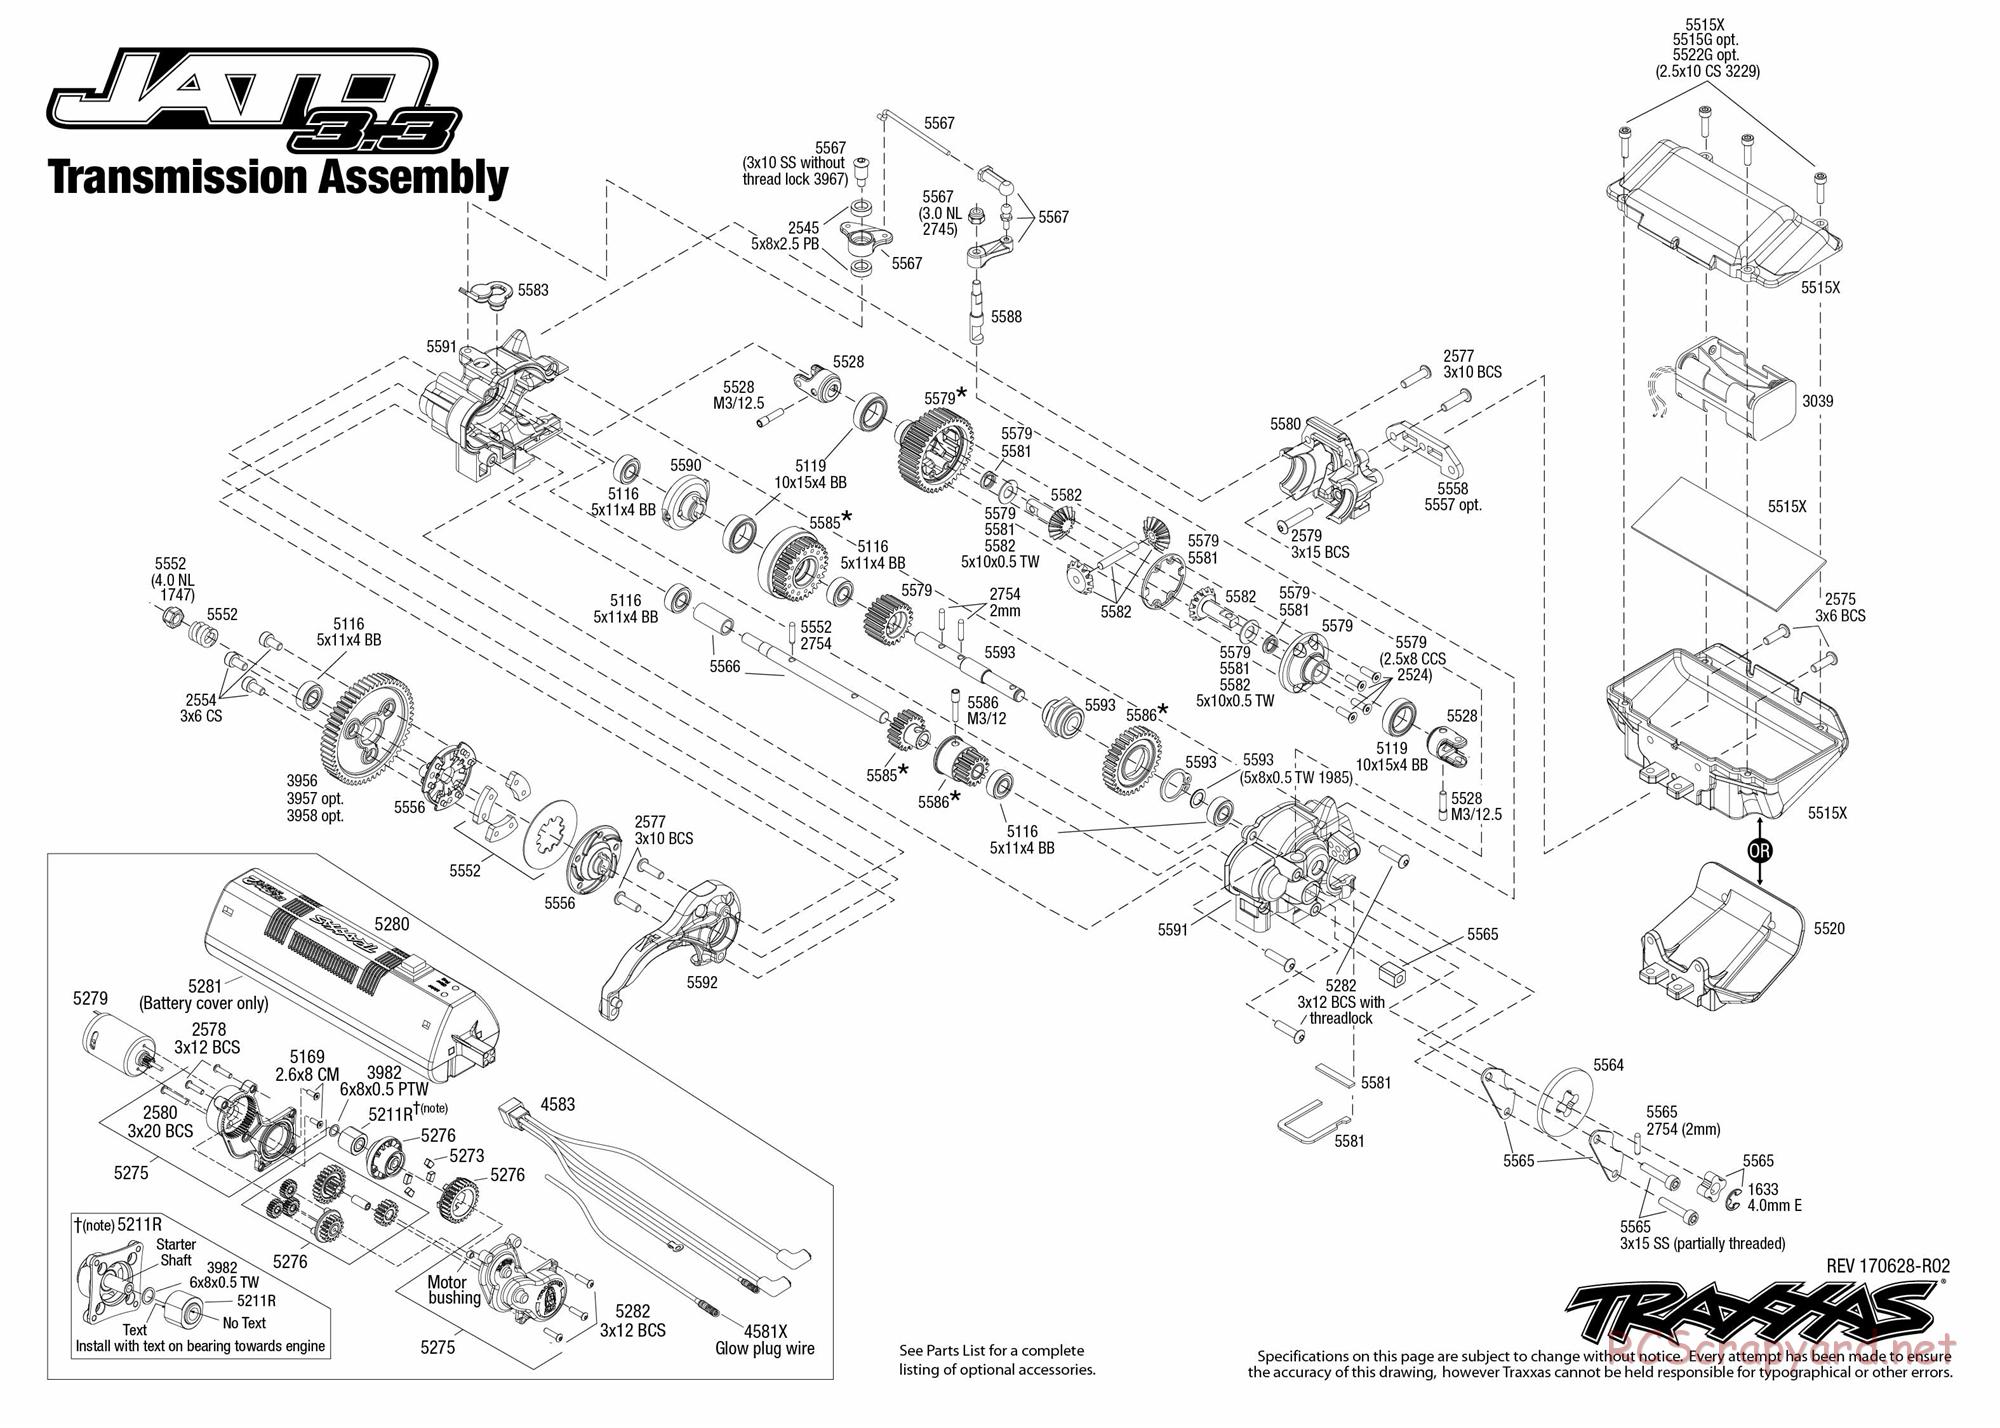 Traxxas - Jato 3.3 (2014) - Exploded Views - Page 5